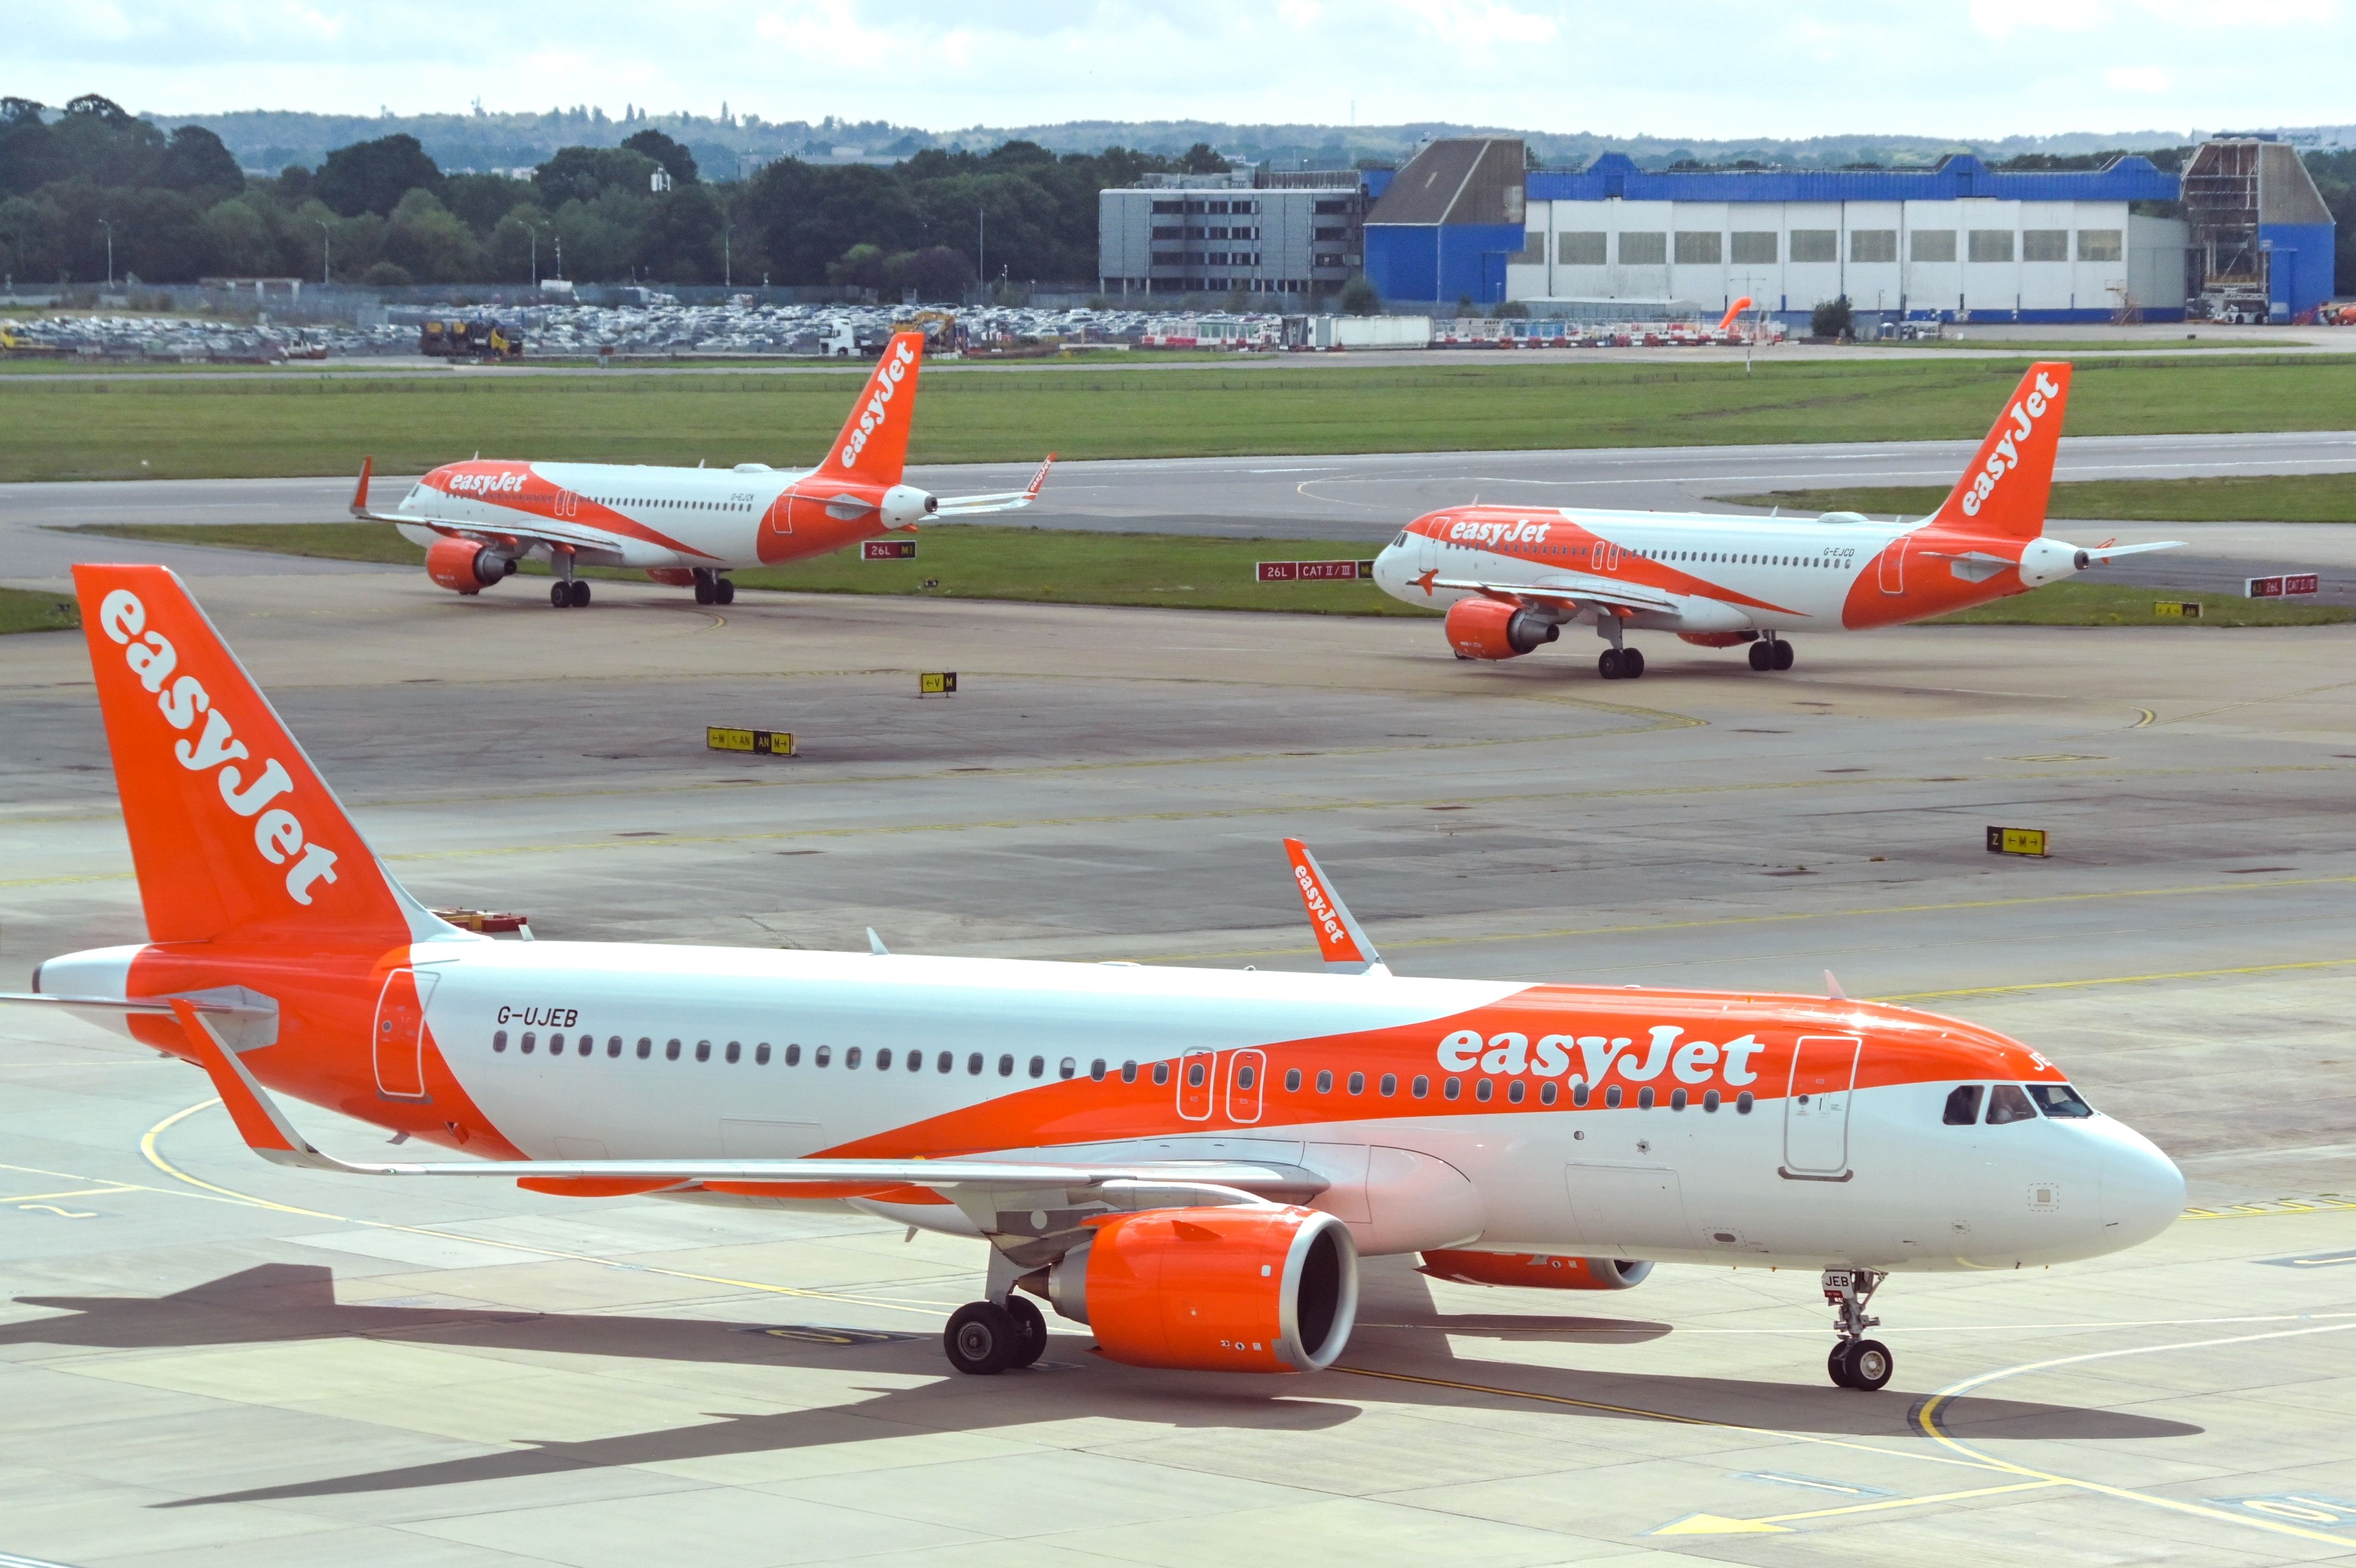 easyJet Planes On The Apron At London Gatwick Airport